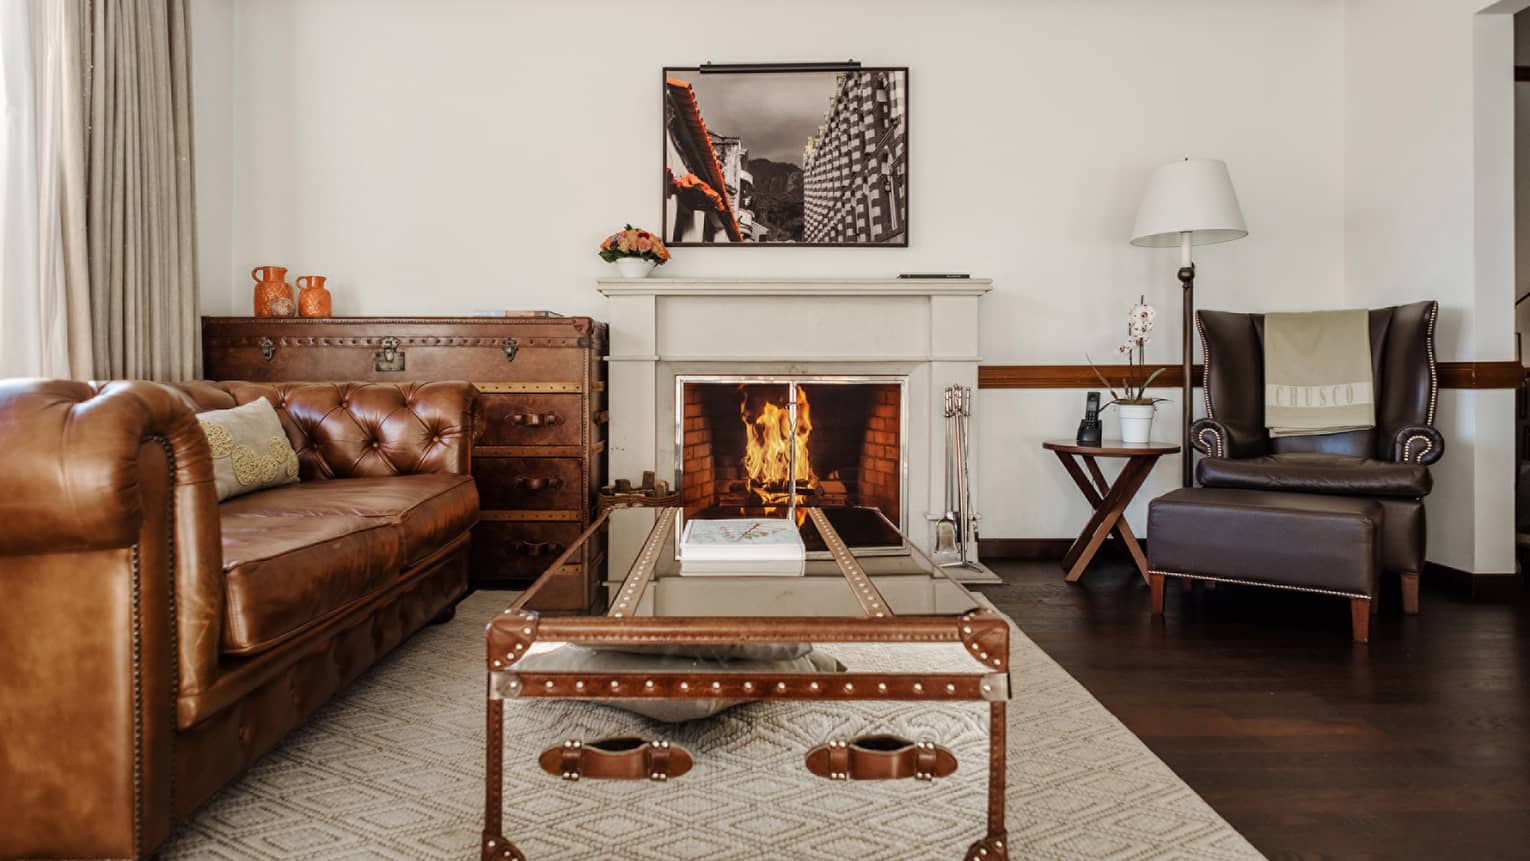 A brown leather chesterfield sofa, dark-brown leather arm chair and two trunk-style tables frame a central fireplace in the living room